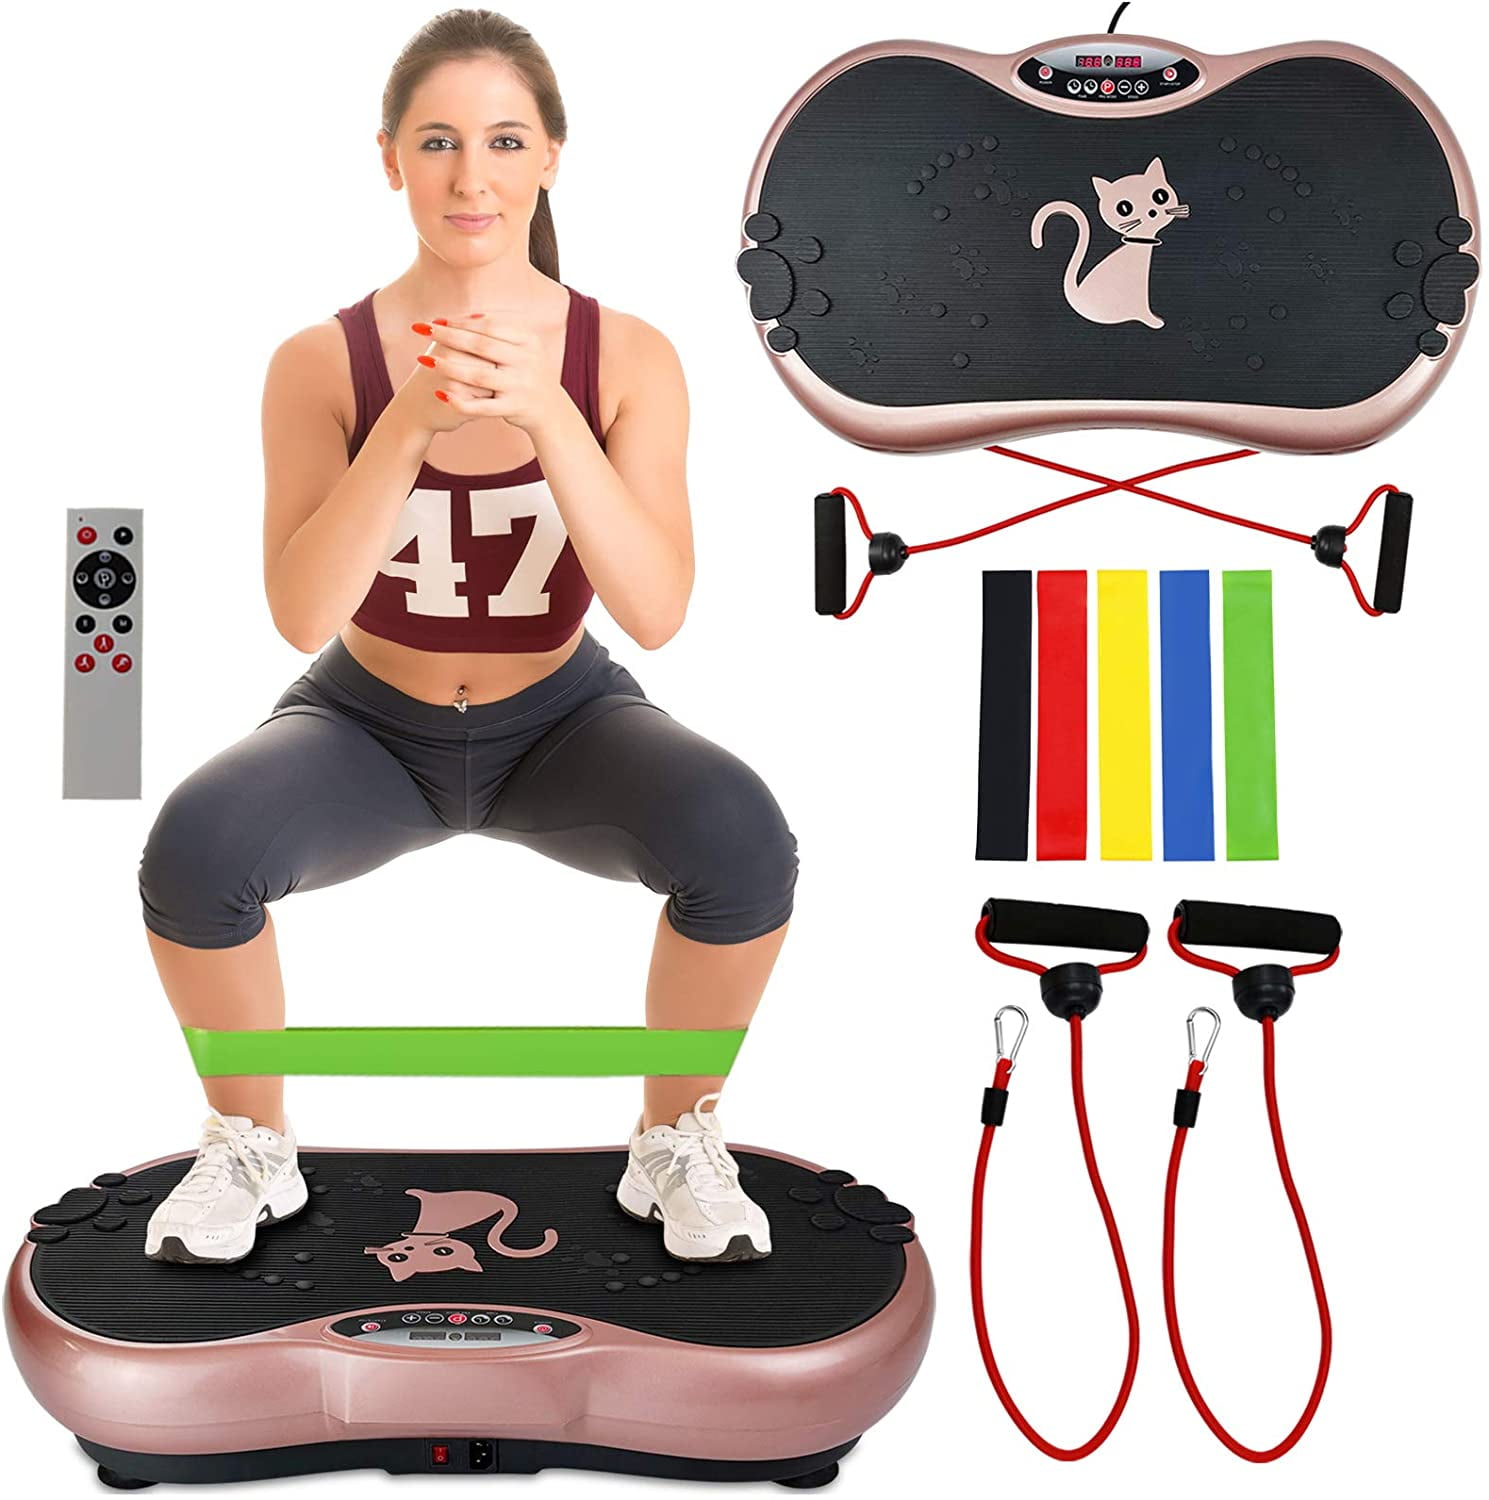 Full Body Vibration Machine Platform Fitness Slim Exercise With Remote Control 